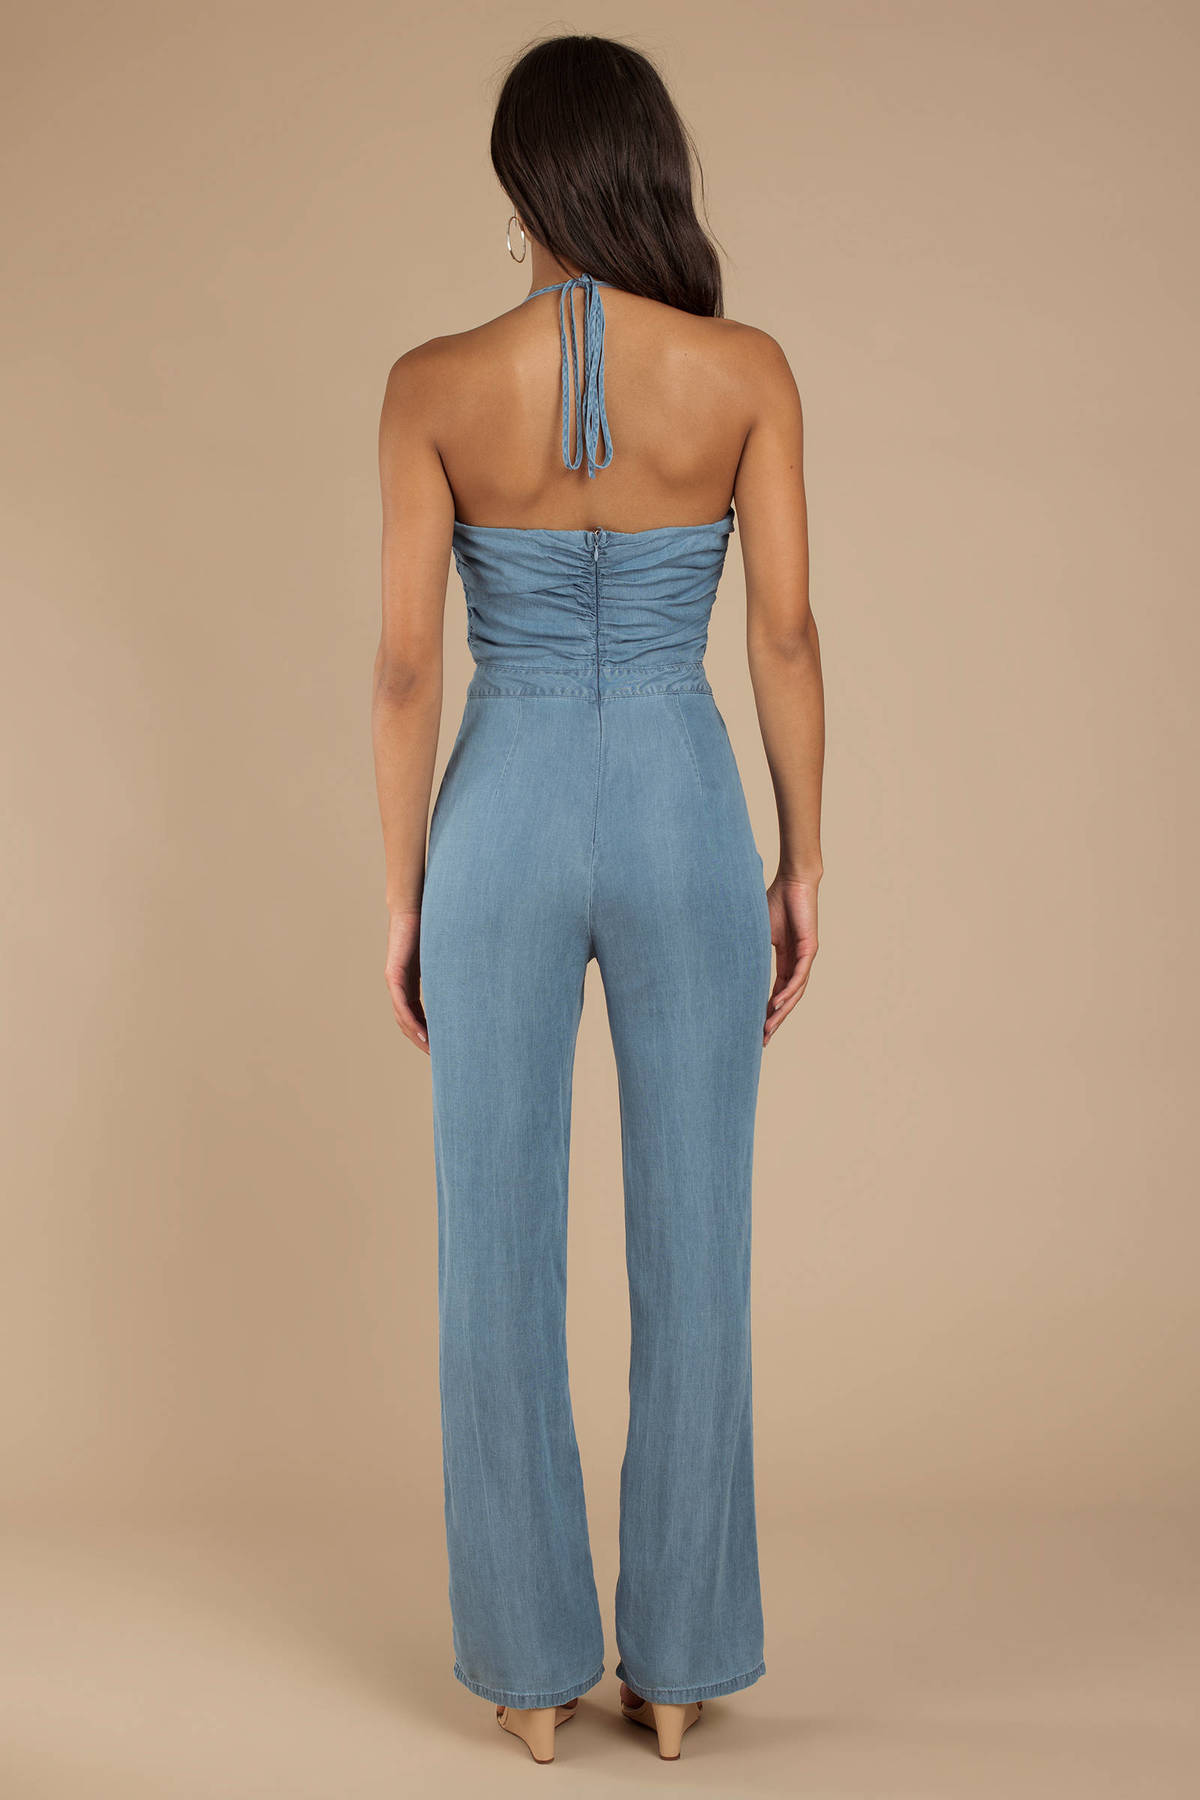 Summertime Sweetheart Chambray Jumpsuit in Light Wash - $29 | Tobi US